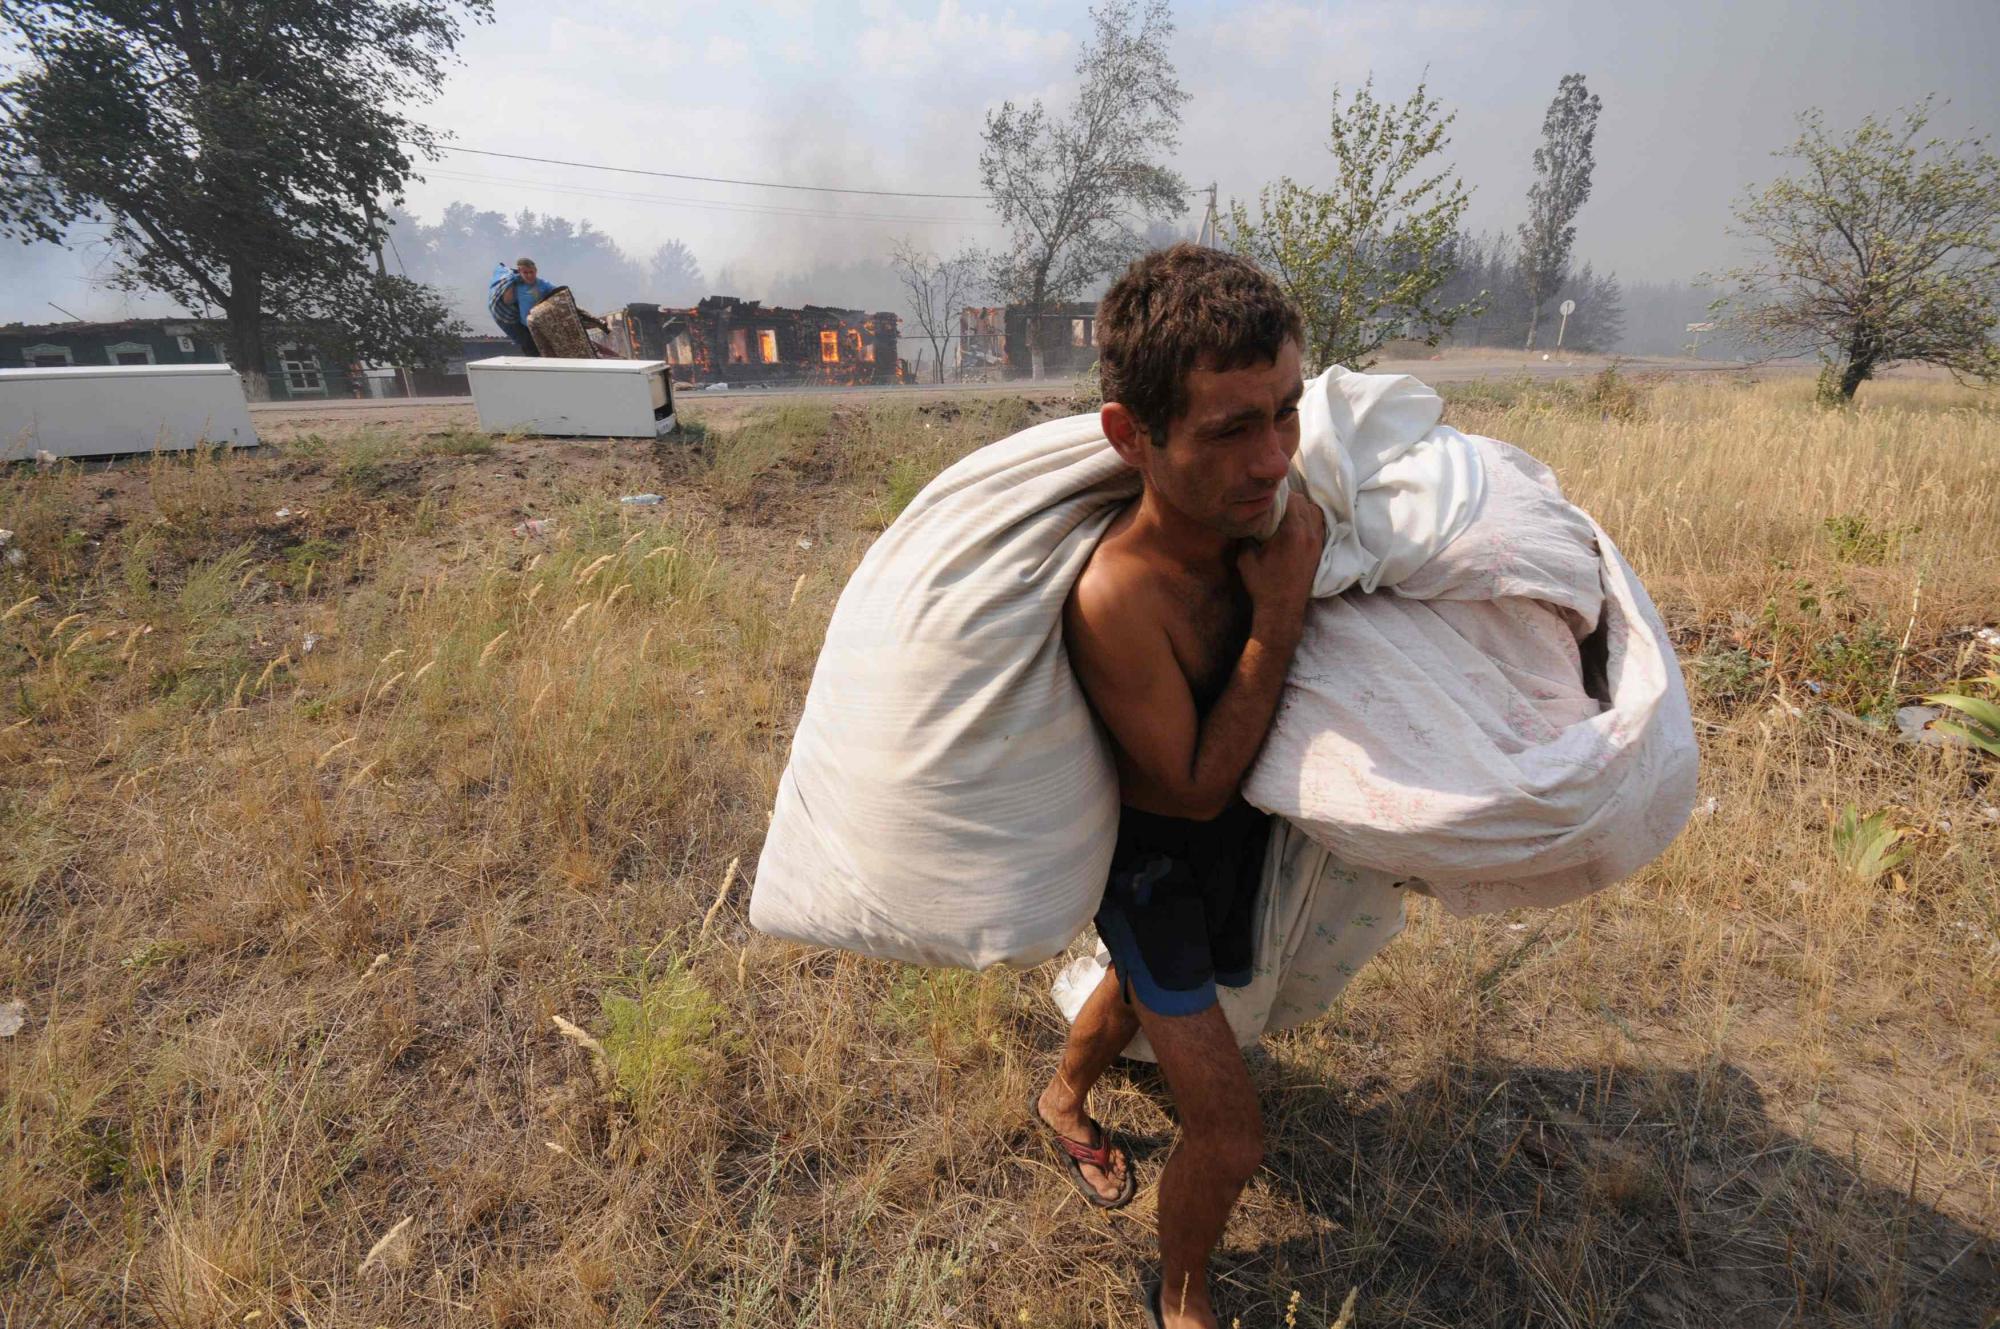 Lingering drought causes fire in Russia